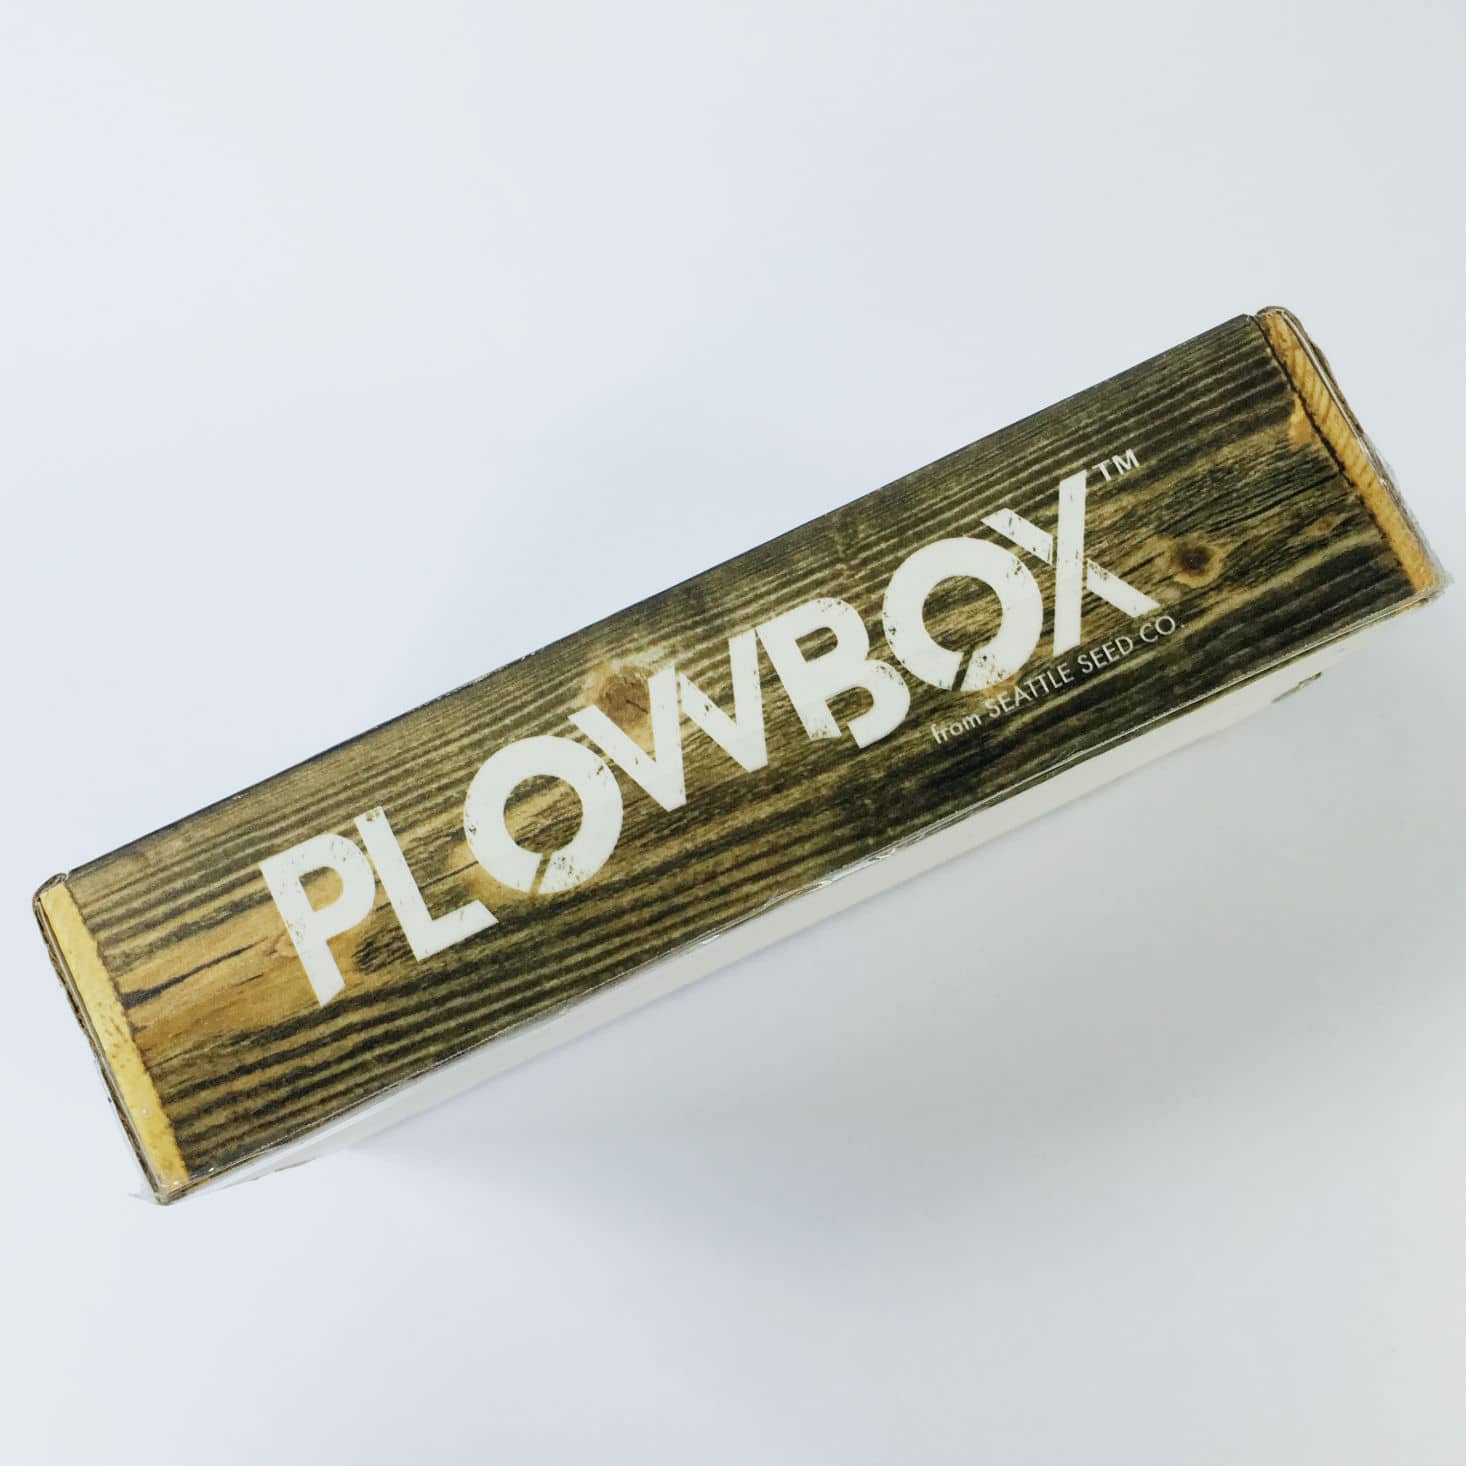 PlowBox Subscription Review + Coupon – Fall 2017